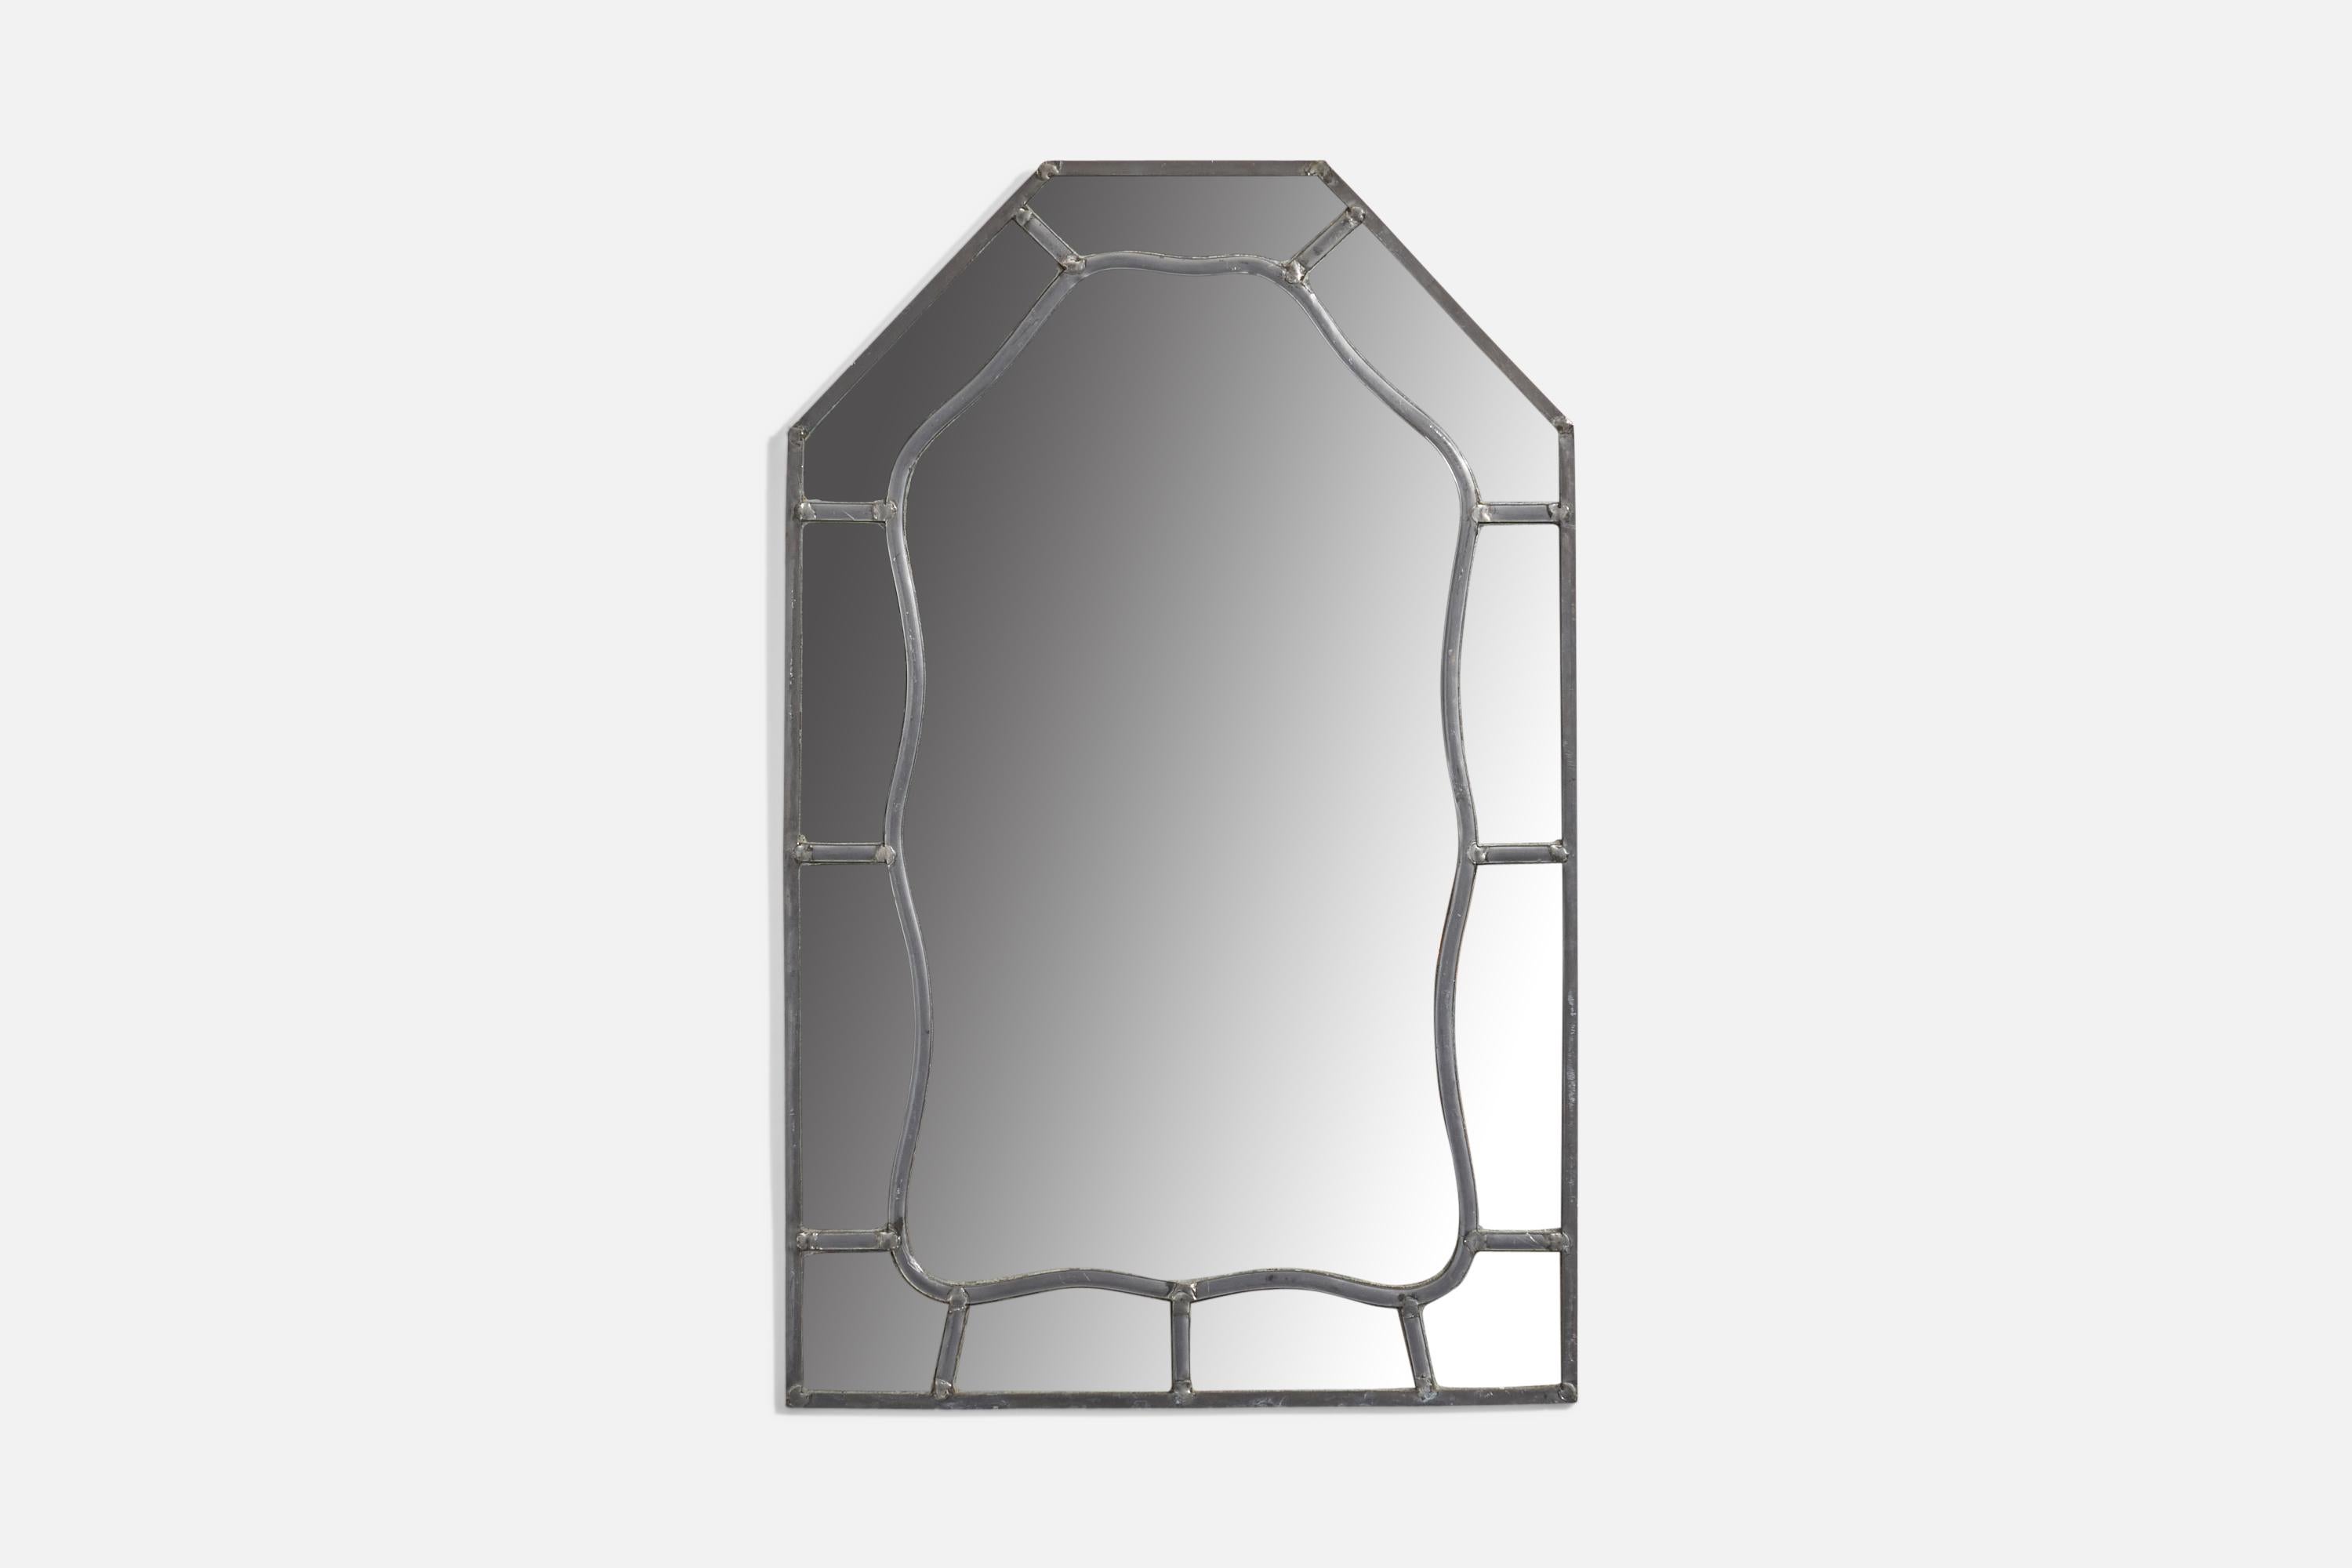 A pewter mirror designed and produced in Sweden, c. 1940s.